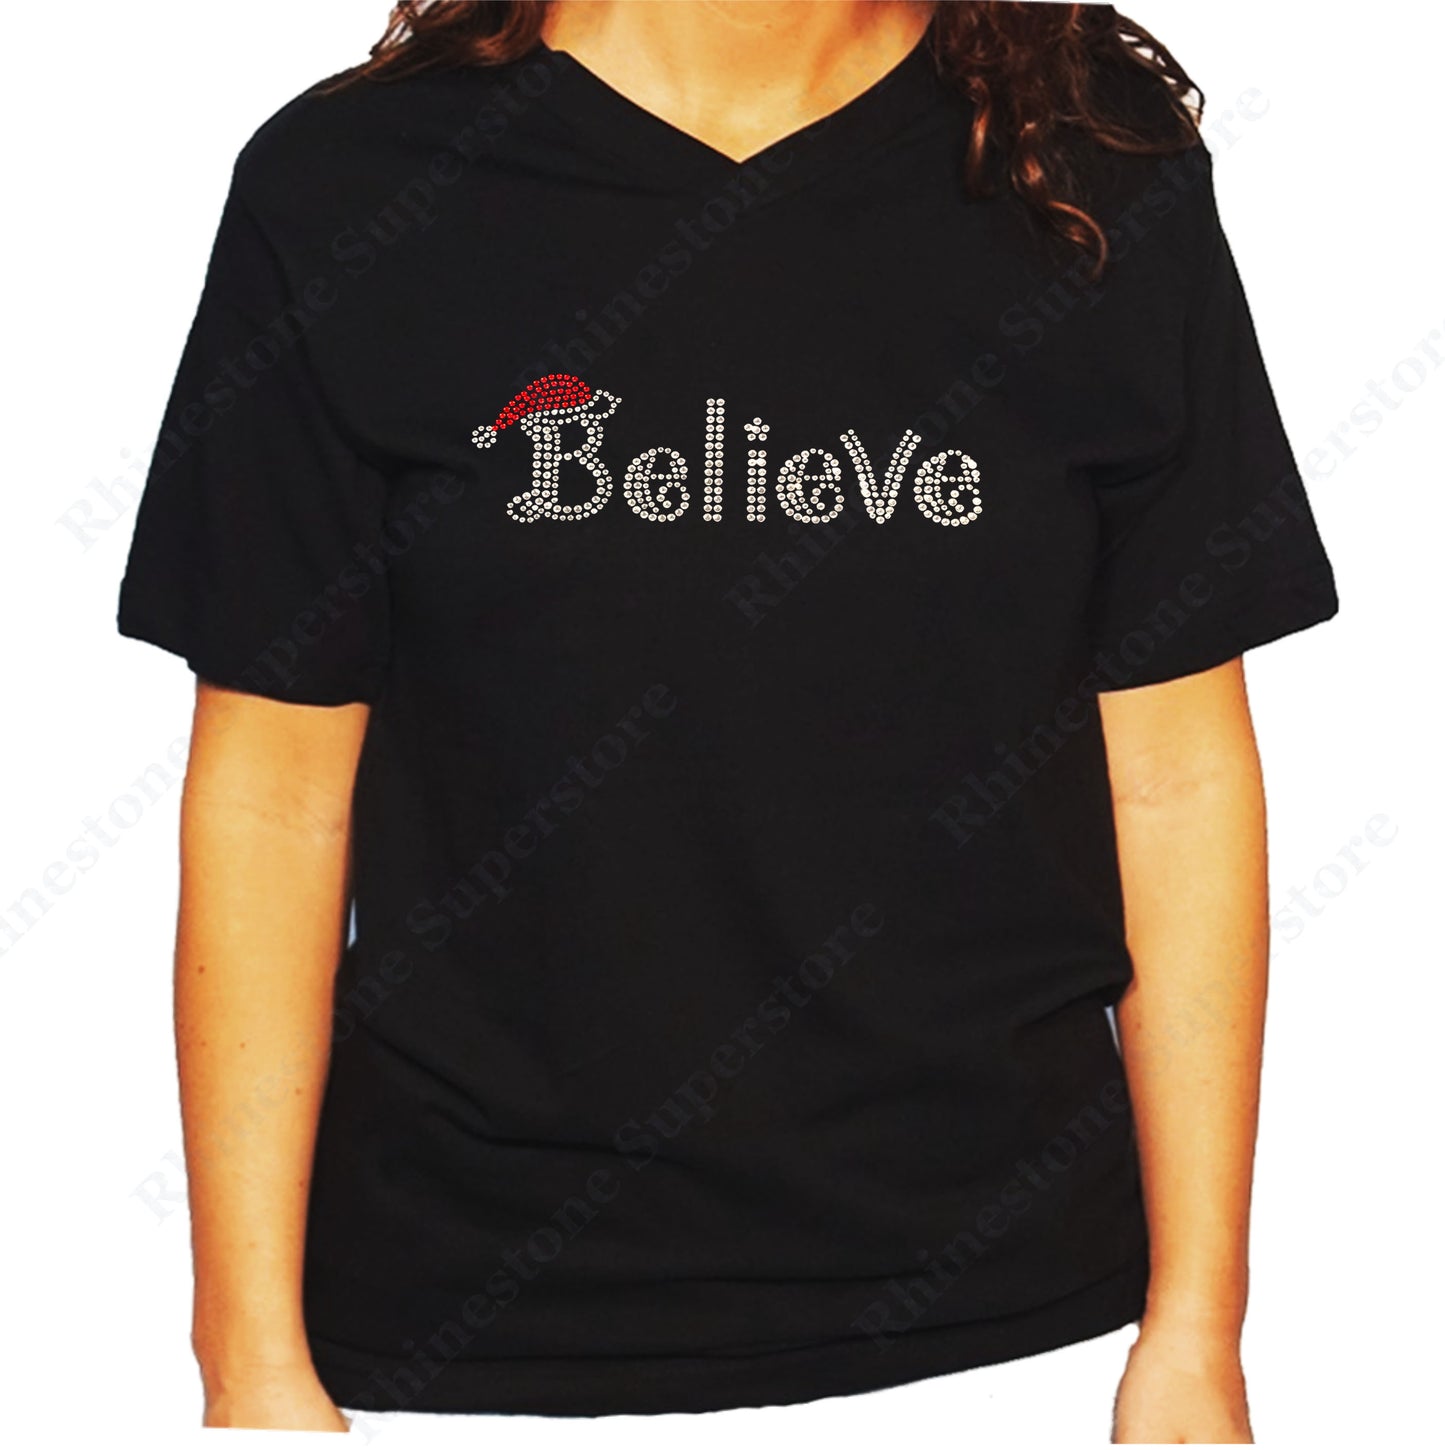 Women's / Unisex T-Shirt with Believe with Santa Hat for Christmas in Rhinestones